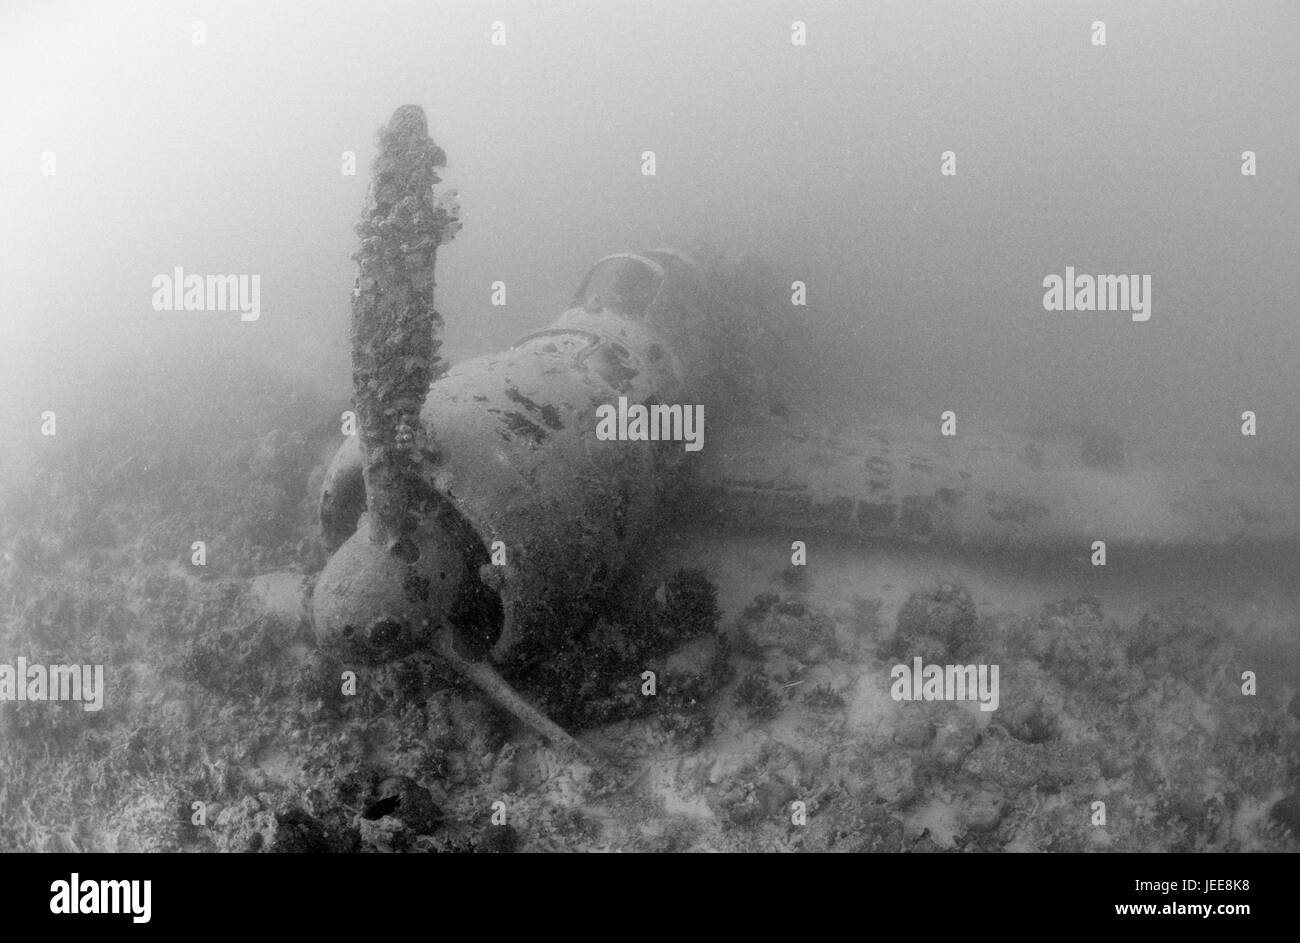 Papua New Guinea, Neuirland, Nakajima B5N2, 'Kate', aircraft wreck, sea, underwater recording, s/w, new Ireland, Kavieng, world war, aerial war, aerial battle, war, air force, aircraft, airplane, powerful striker, war airplane, Nakajima-B5N2, torpedo powerful striker, horizontal powerful striker, in Japanese, death, remains, wreck, site of the crash, crashed, submergedly, shot, destiny, expiration, past, war victim, sea, seabed, seabed, water, spread, skin-dive, forget, overgrows, place of interest, Stock Photo